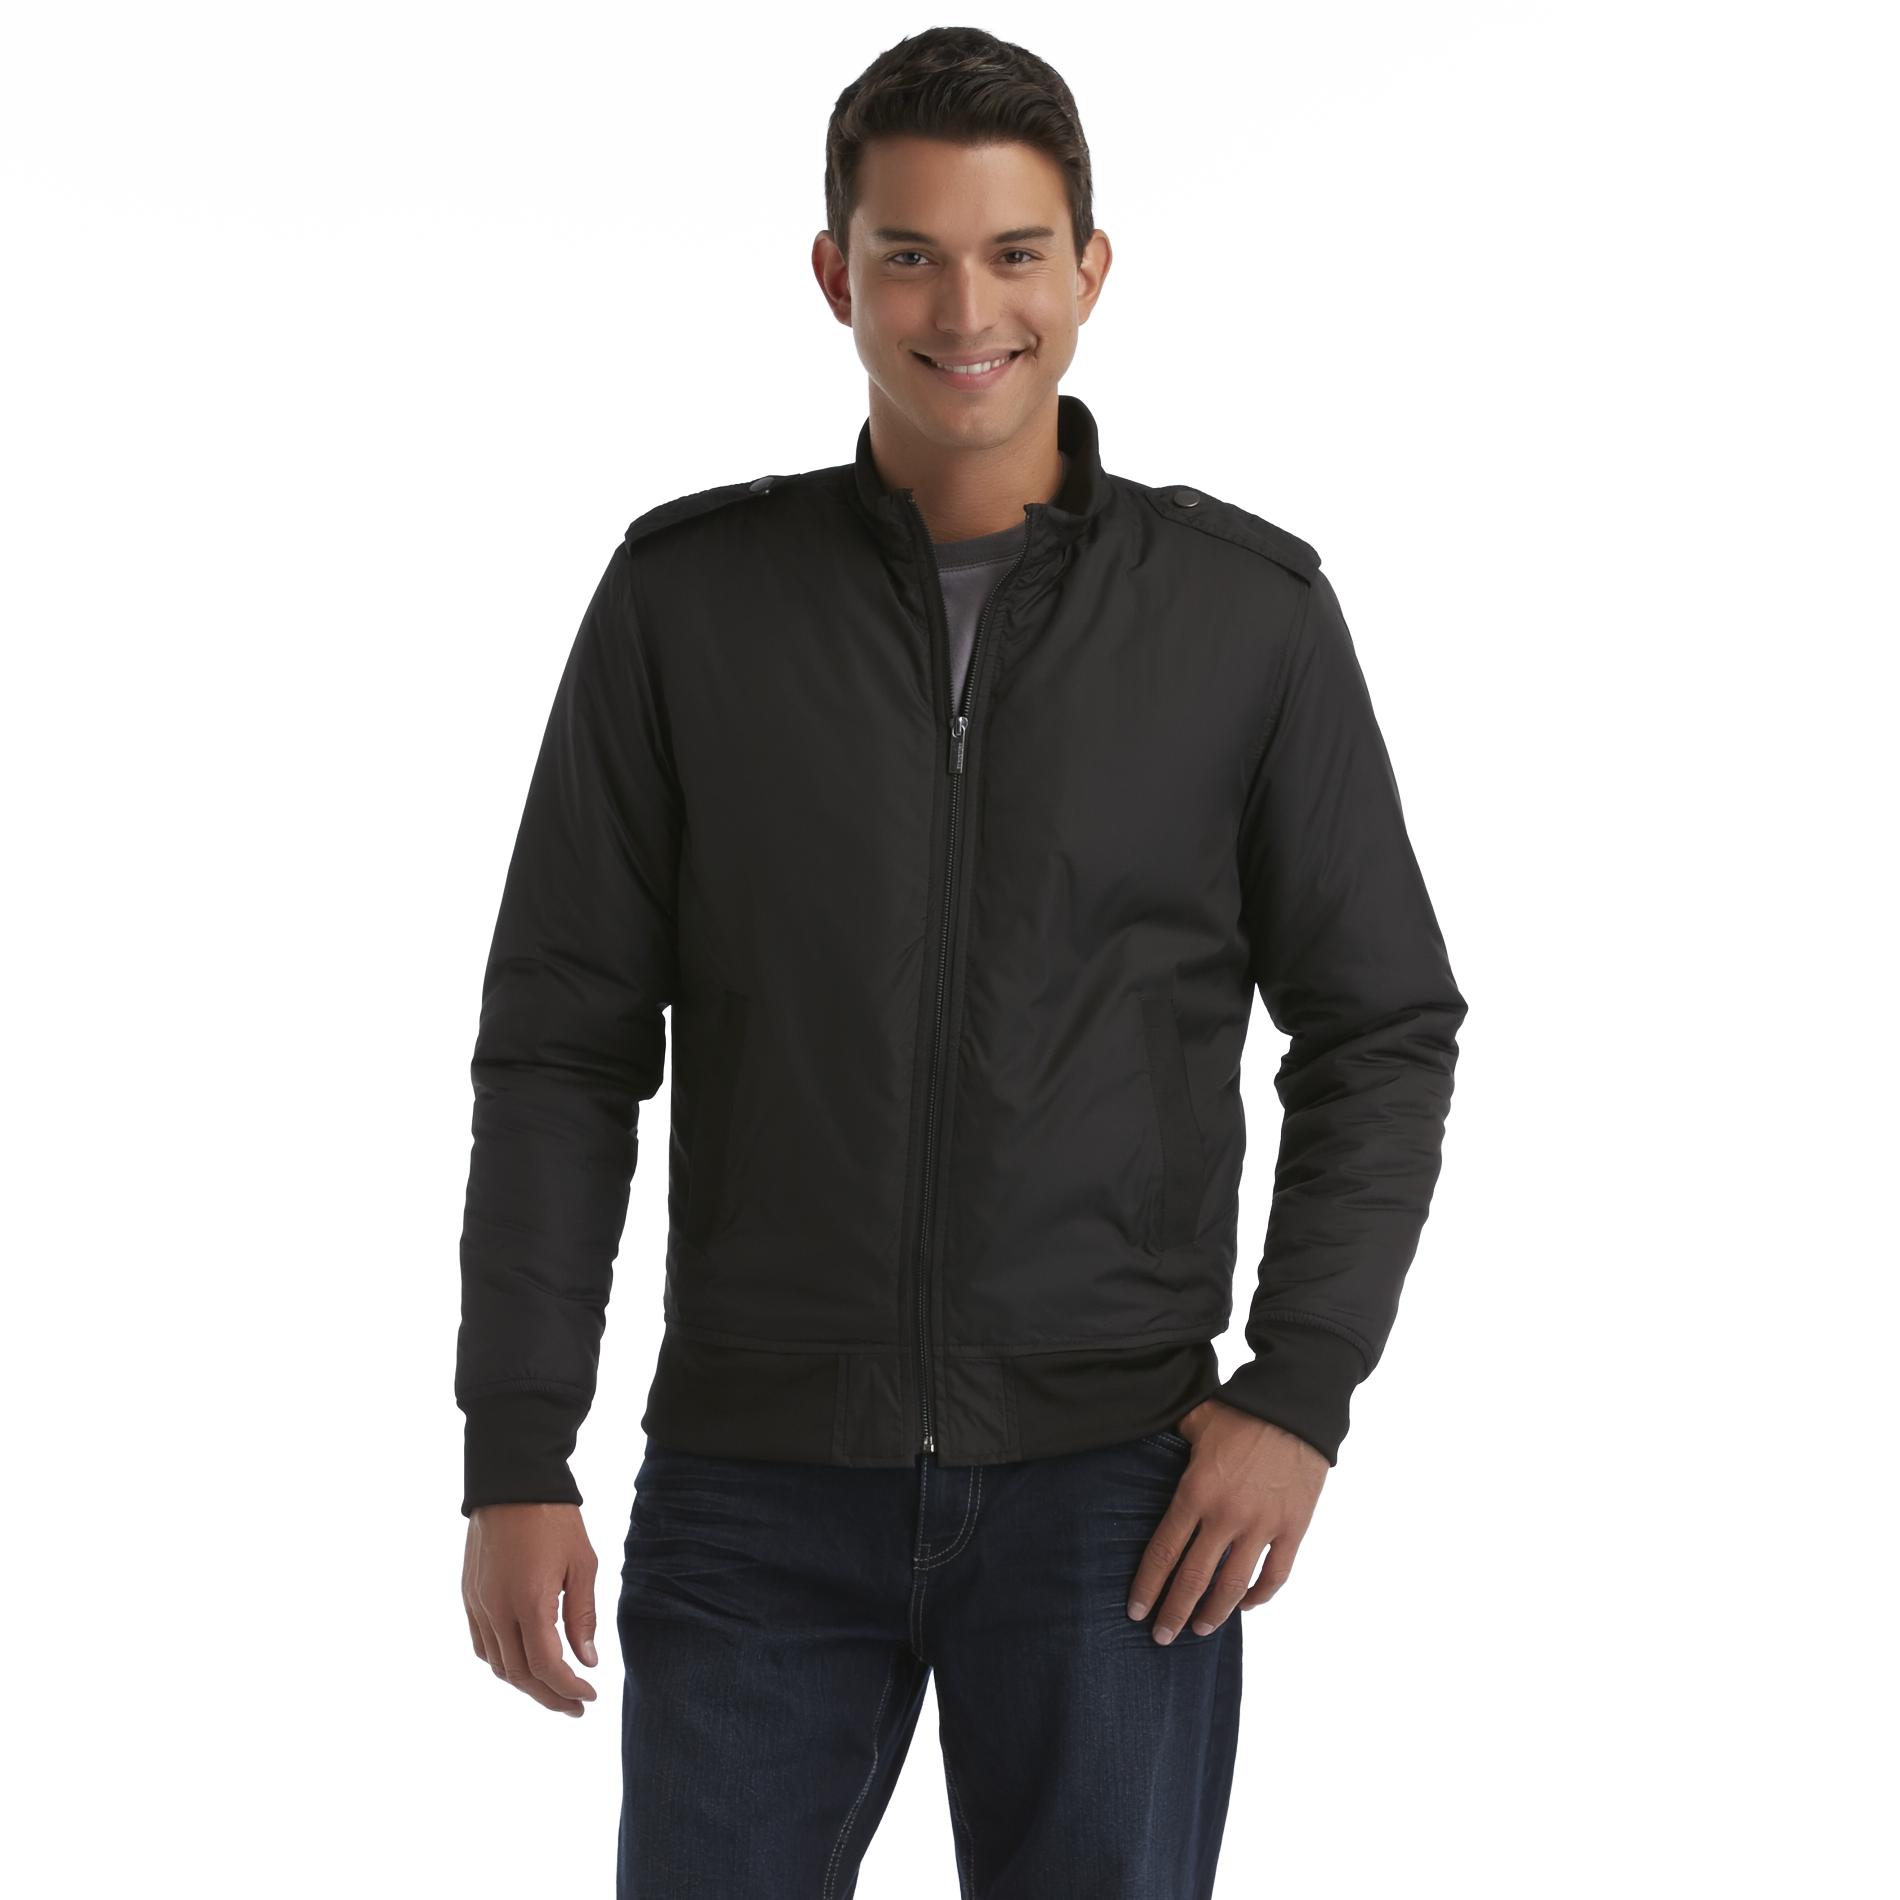 Structure Men's Insulated Bomber Jacket